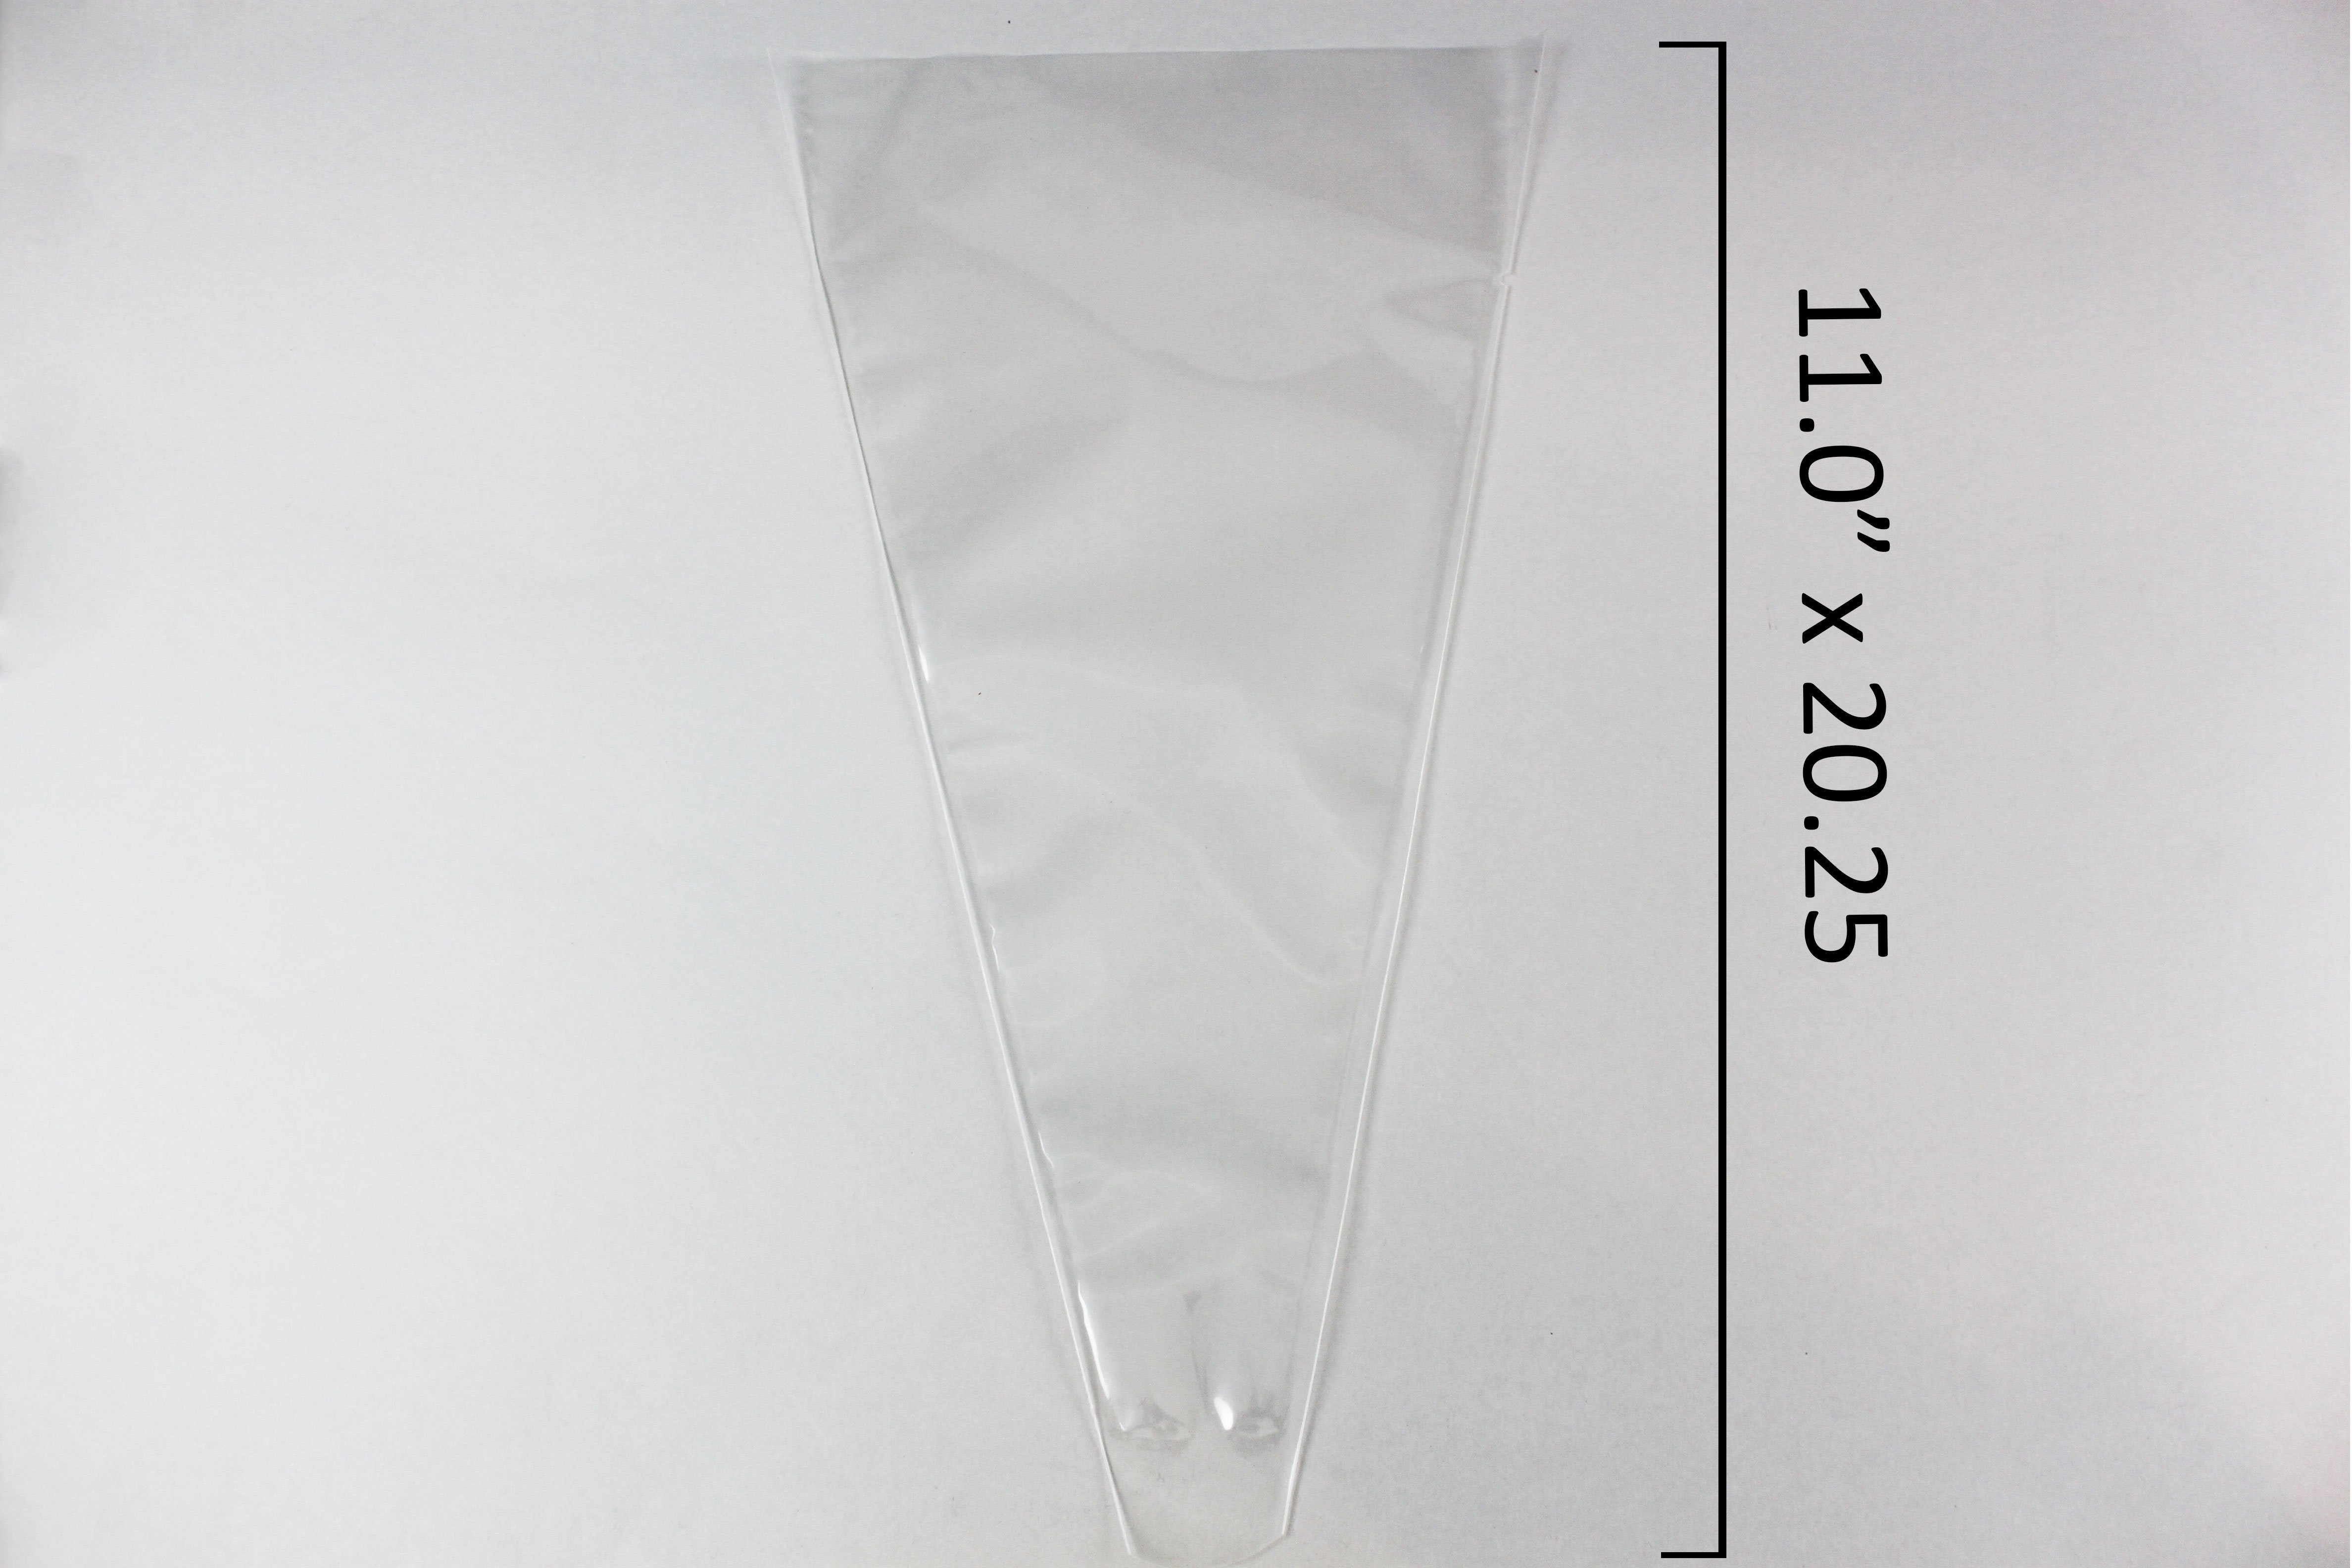 cone shaped glass vase of tr112025tn 11 x 20 25 279 4 mm x 514 35 mm od cone shaped for tr112025tn 11 x 20 25 279 4 mm x 514 35 mm od cone shaped pouch 500 case